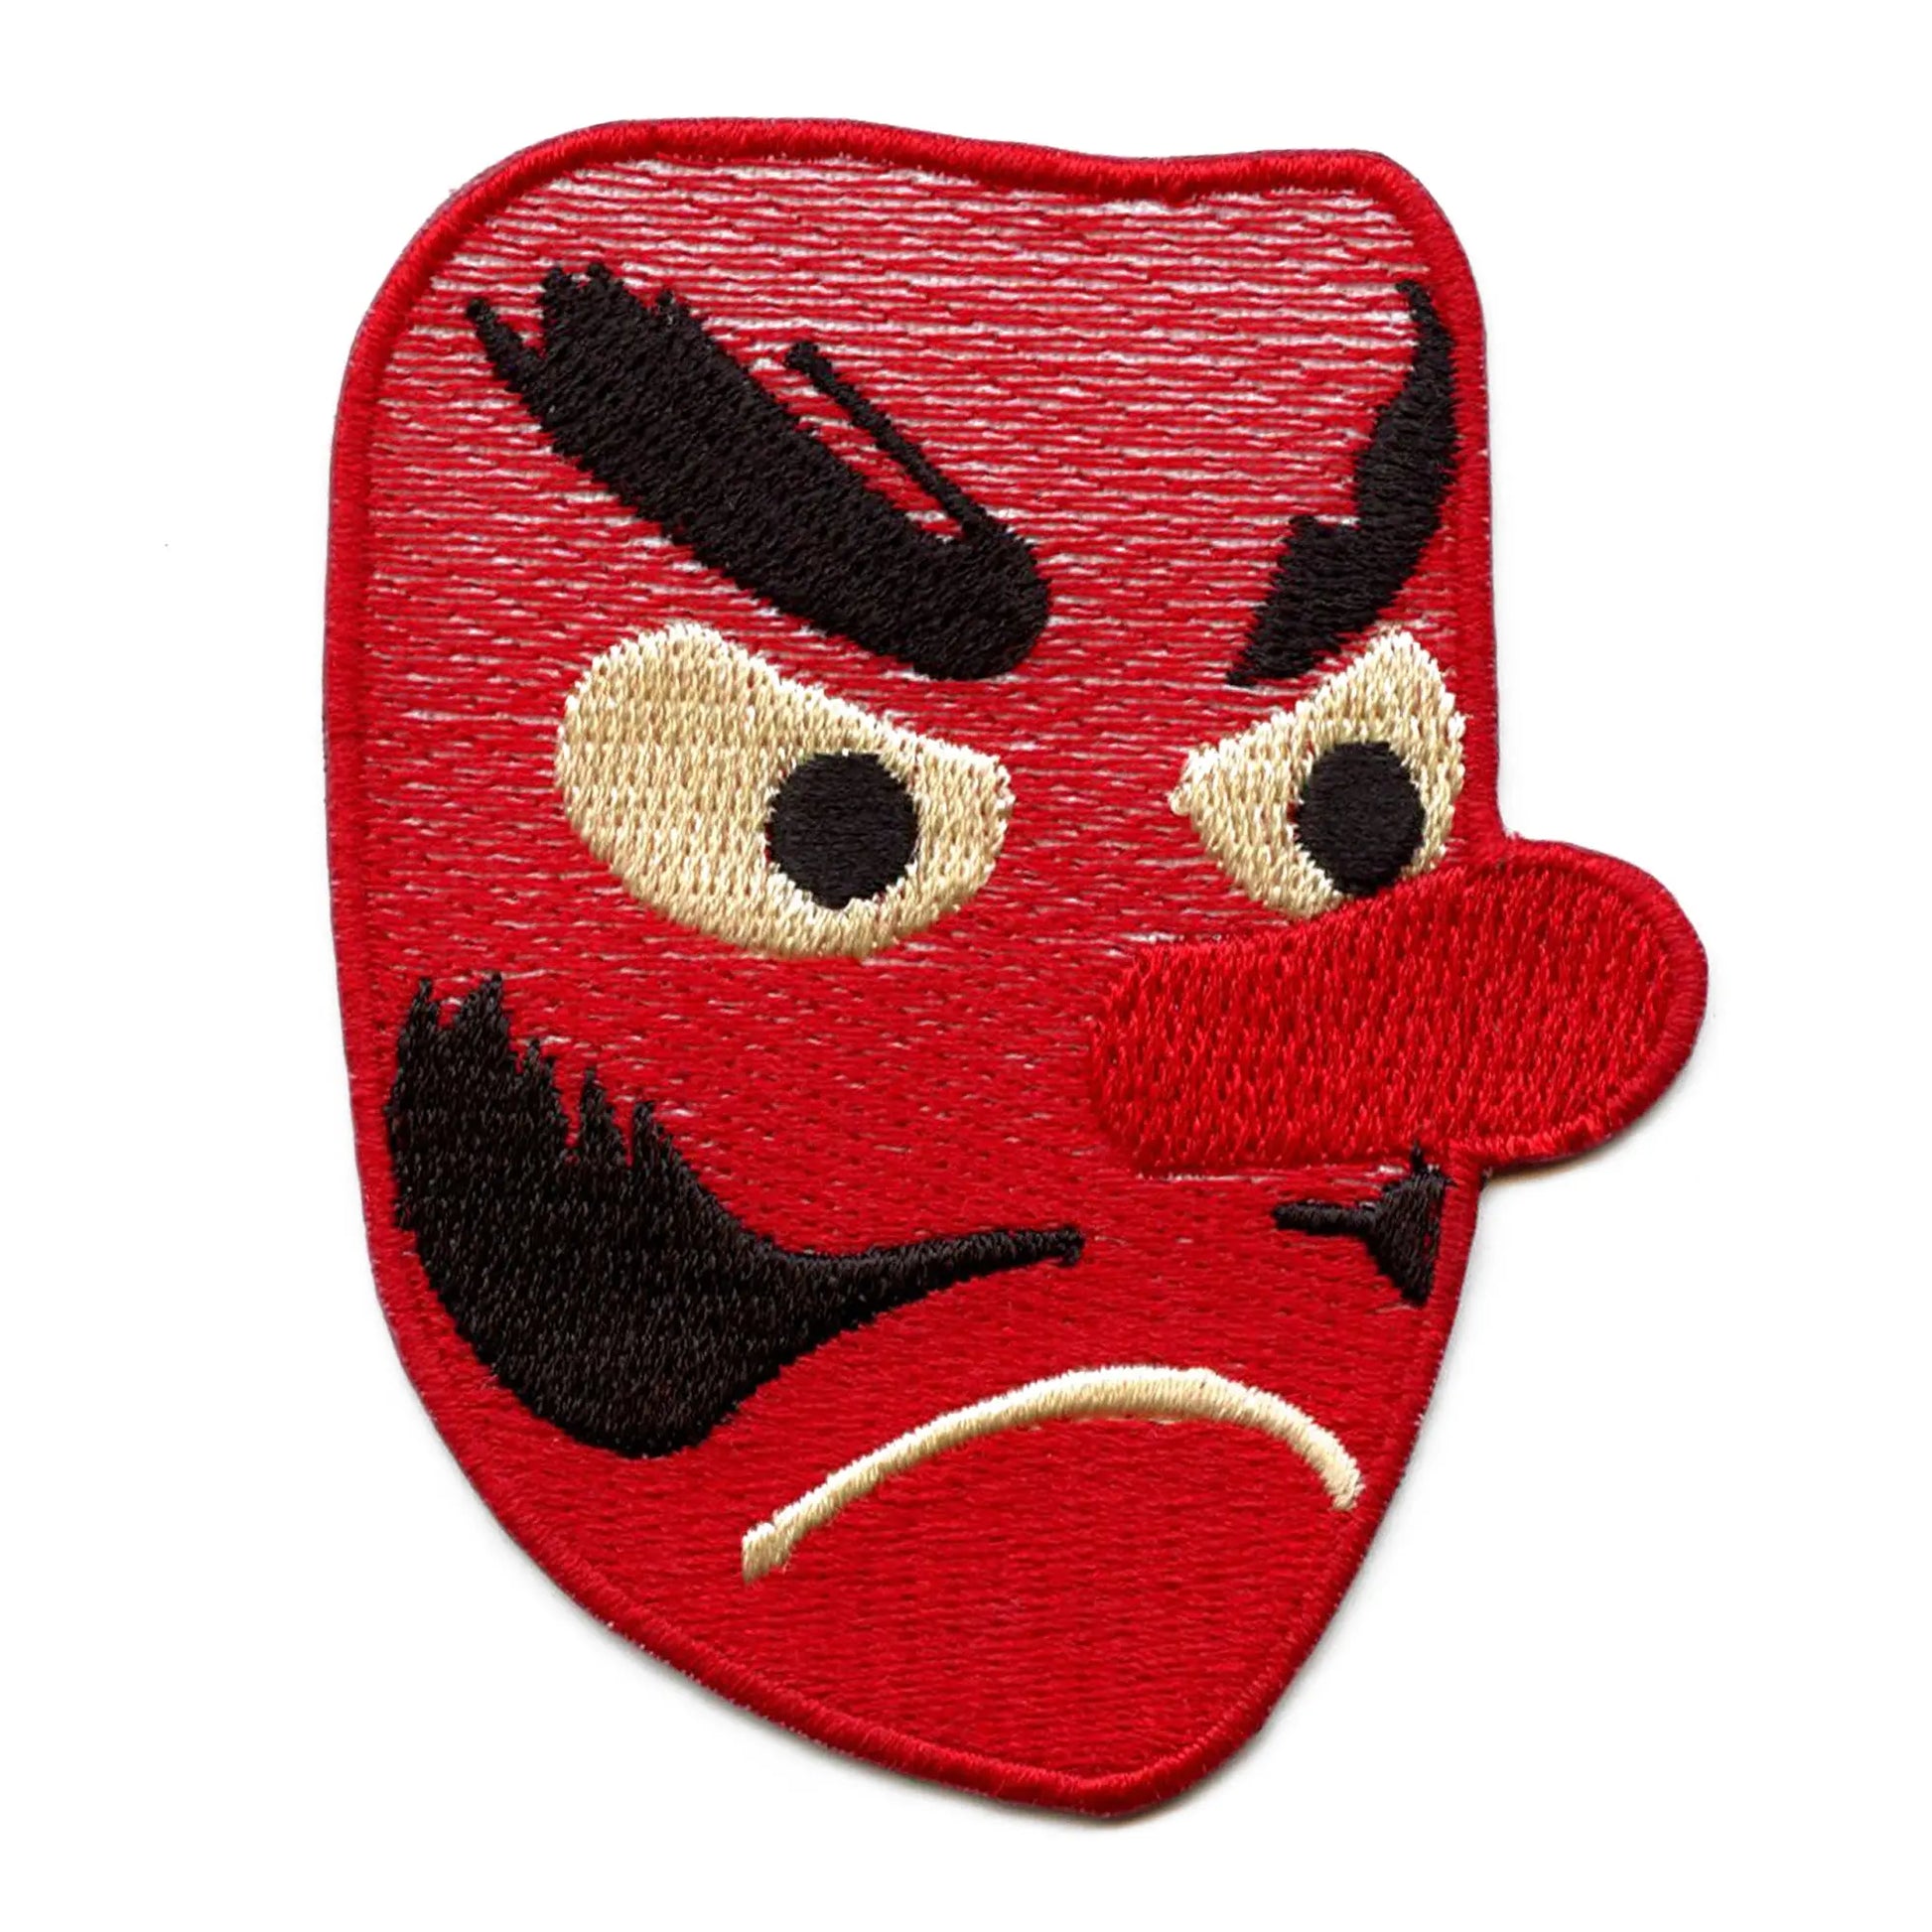 Japanese Goblin Emoji Patch Tengu Red Mask Embroidered Iron On